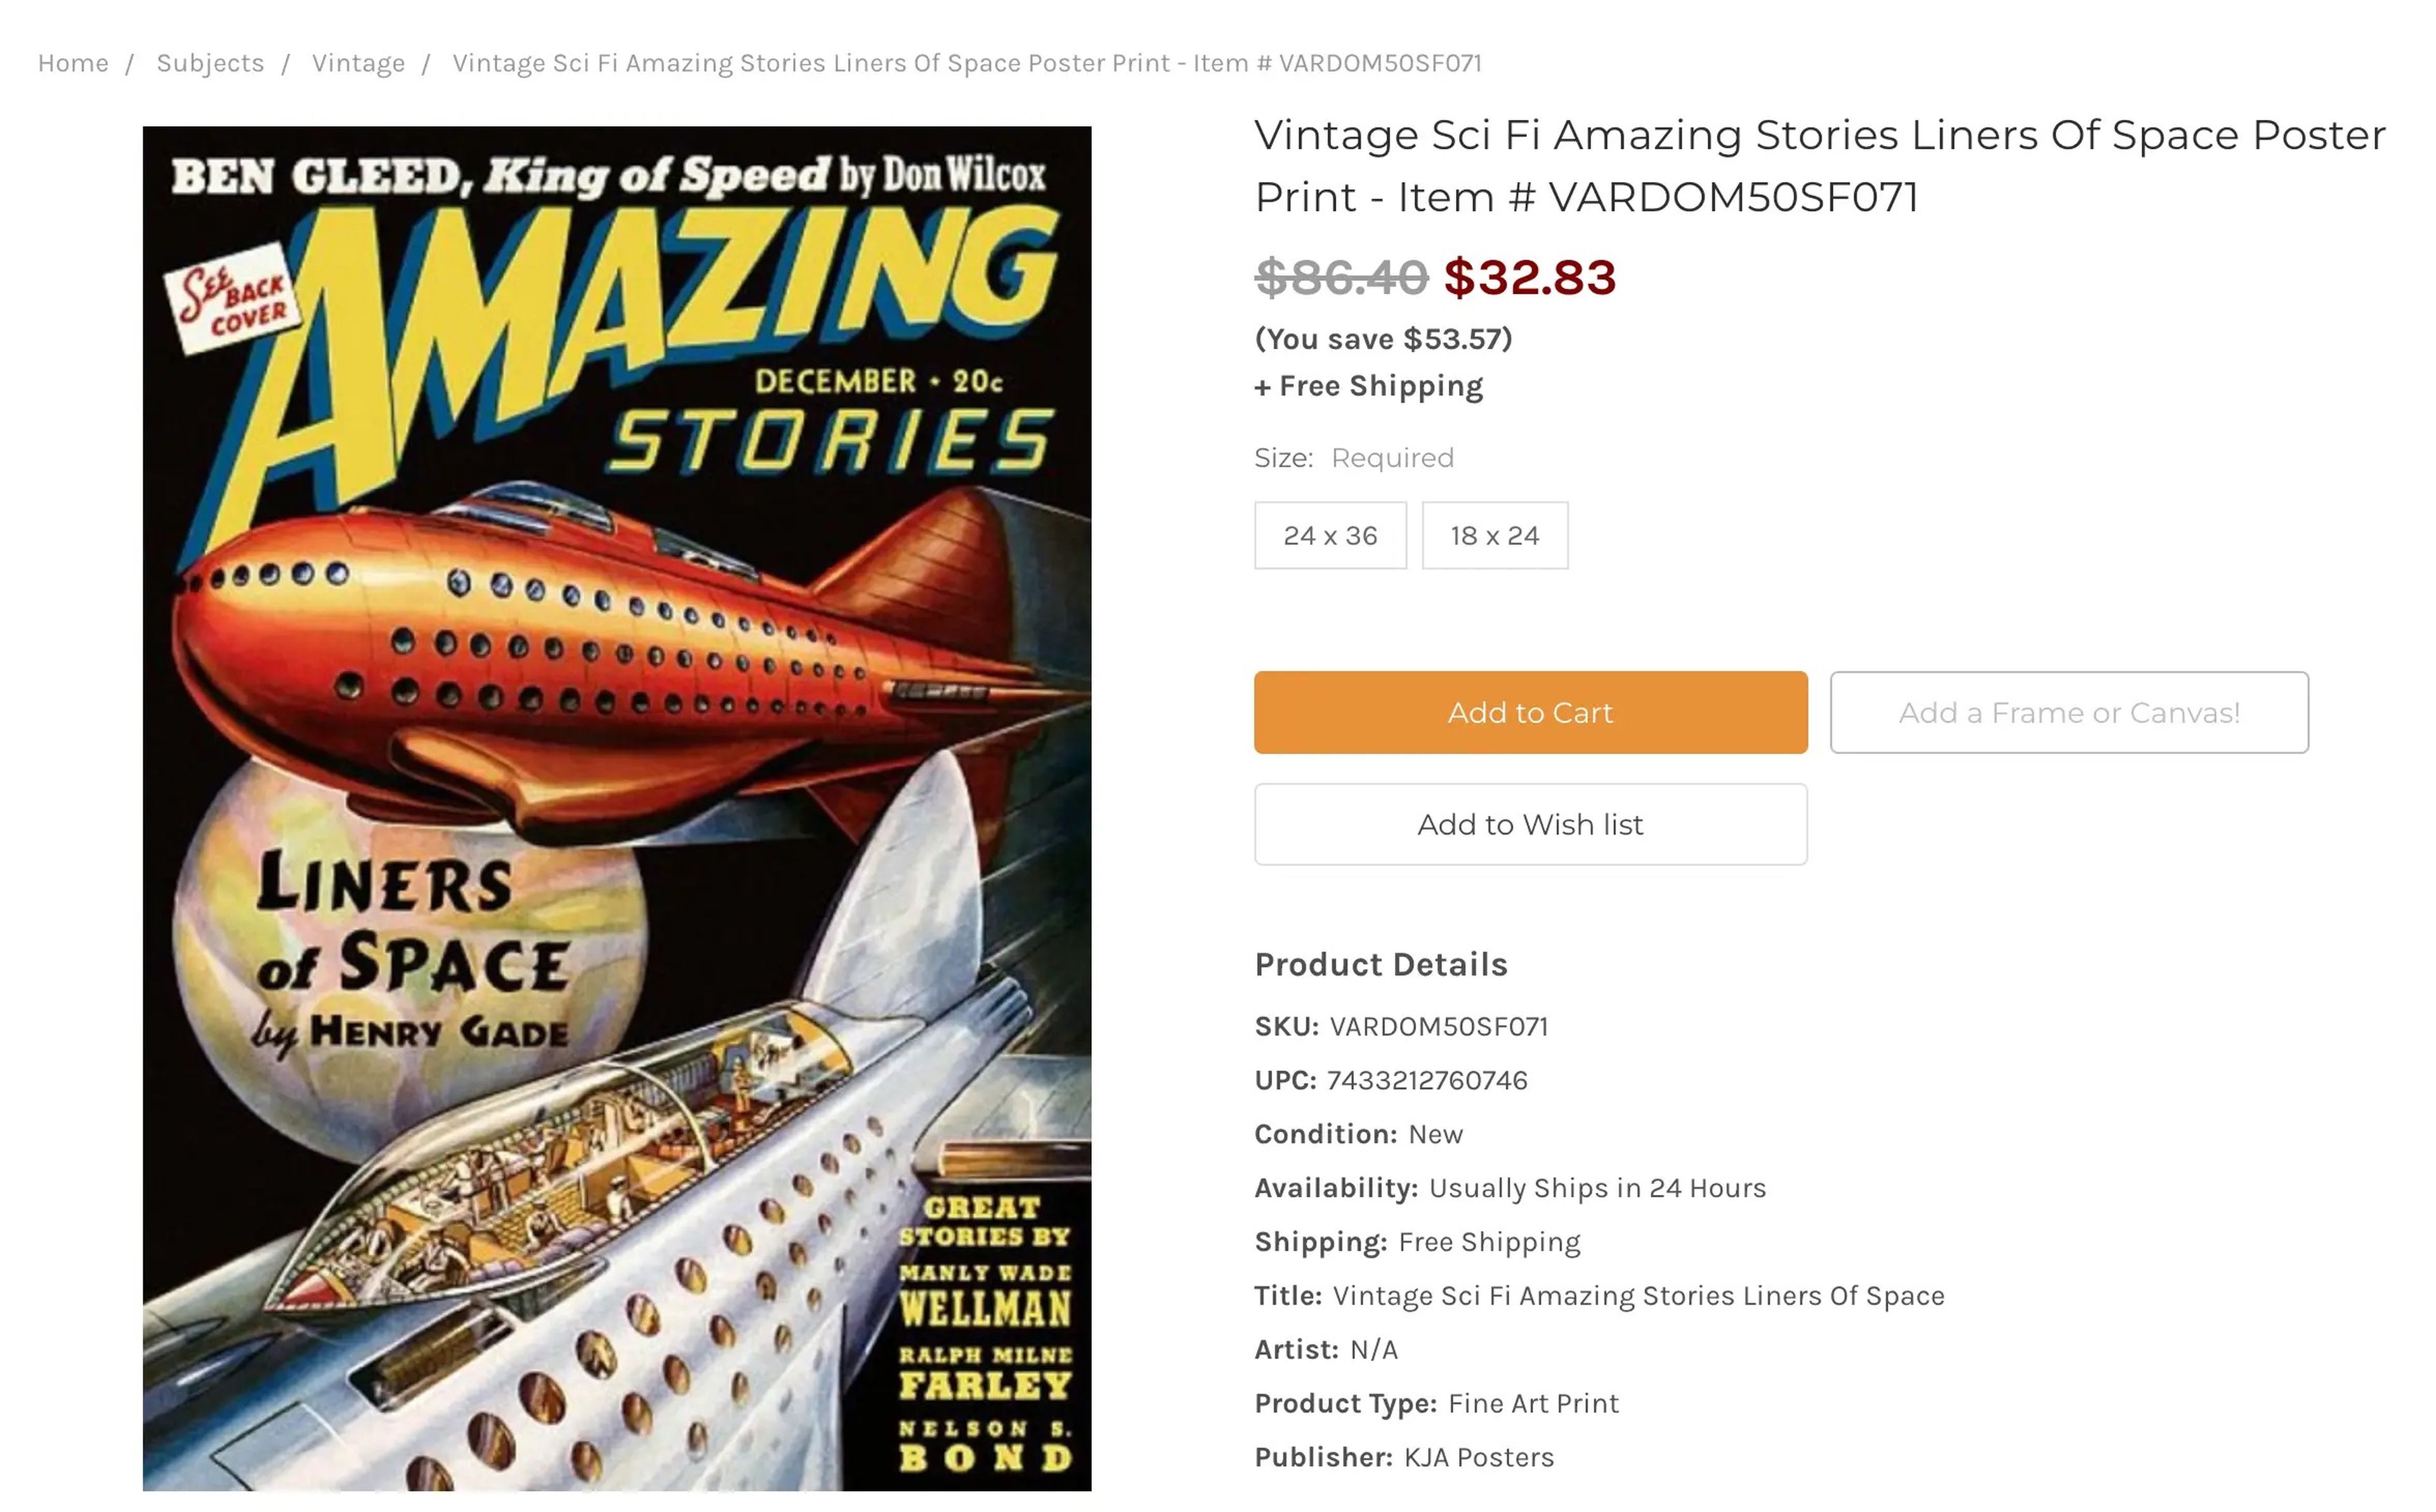 A screenshot of Posterazzi's listing for one "amazing stories" the posters.